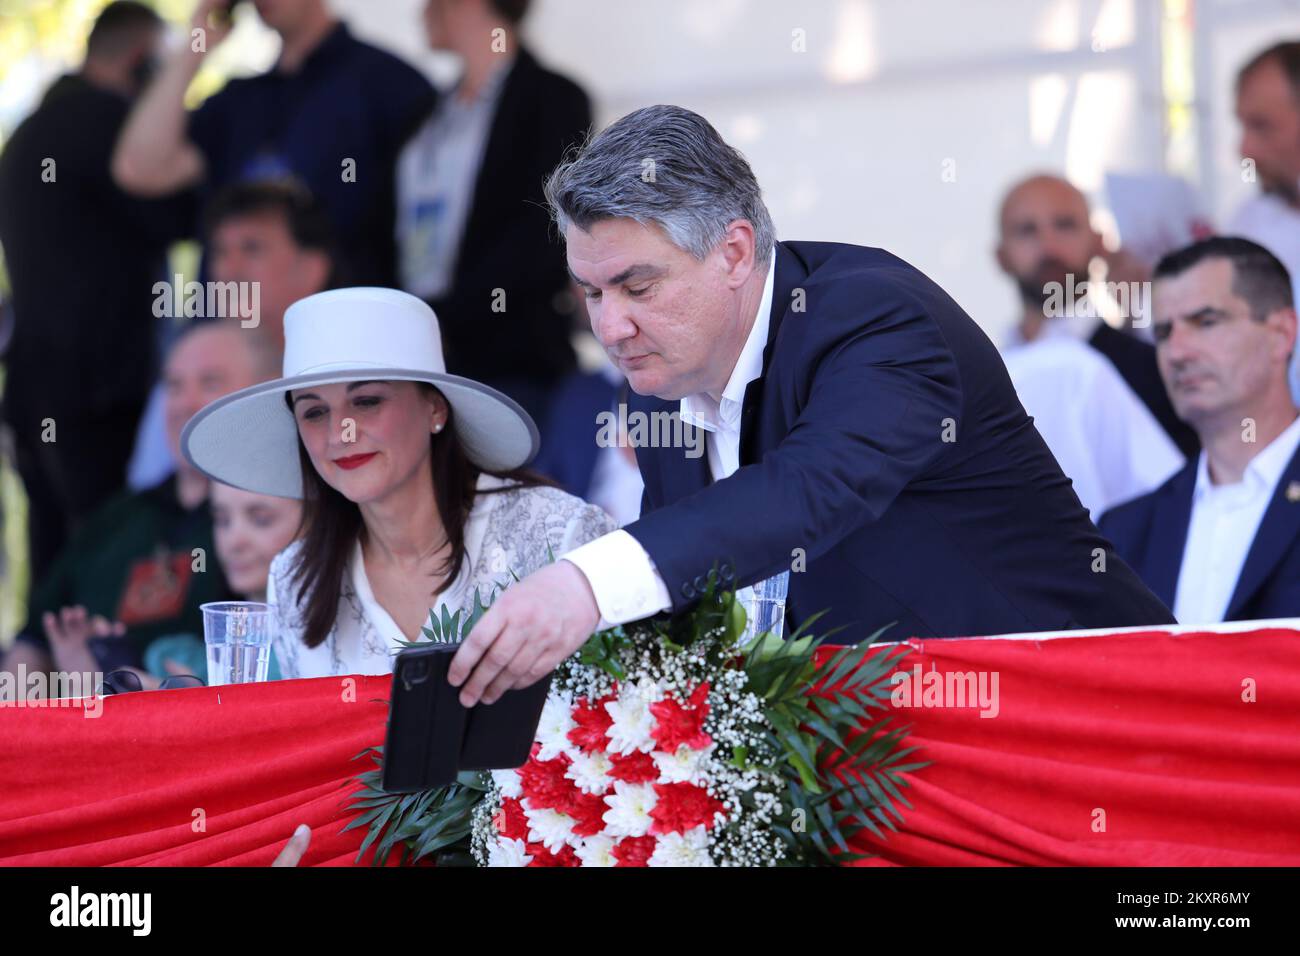 Croatian president Zoran Milanovic with his wife Sanja Music Milanovic during the famous knight's game Sinjska Alka that was held for the 306th time in Sinj on August 8, 2021. Alka is the last stage of the competition after Bara and Coja. Alka is a competition in which alkars ride horses to throw an alka spear. The Alkar competition is conducted in such a way that the Alkar on horseback in a full race spears a spear that hangs in the middle of a rope stretched horizontally between two pillars attached to the edges of the racetrack. Each alkar wears an antique knight's uniform in the most beau Stock Photo